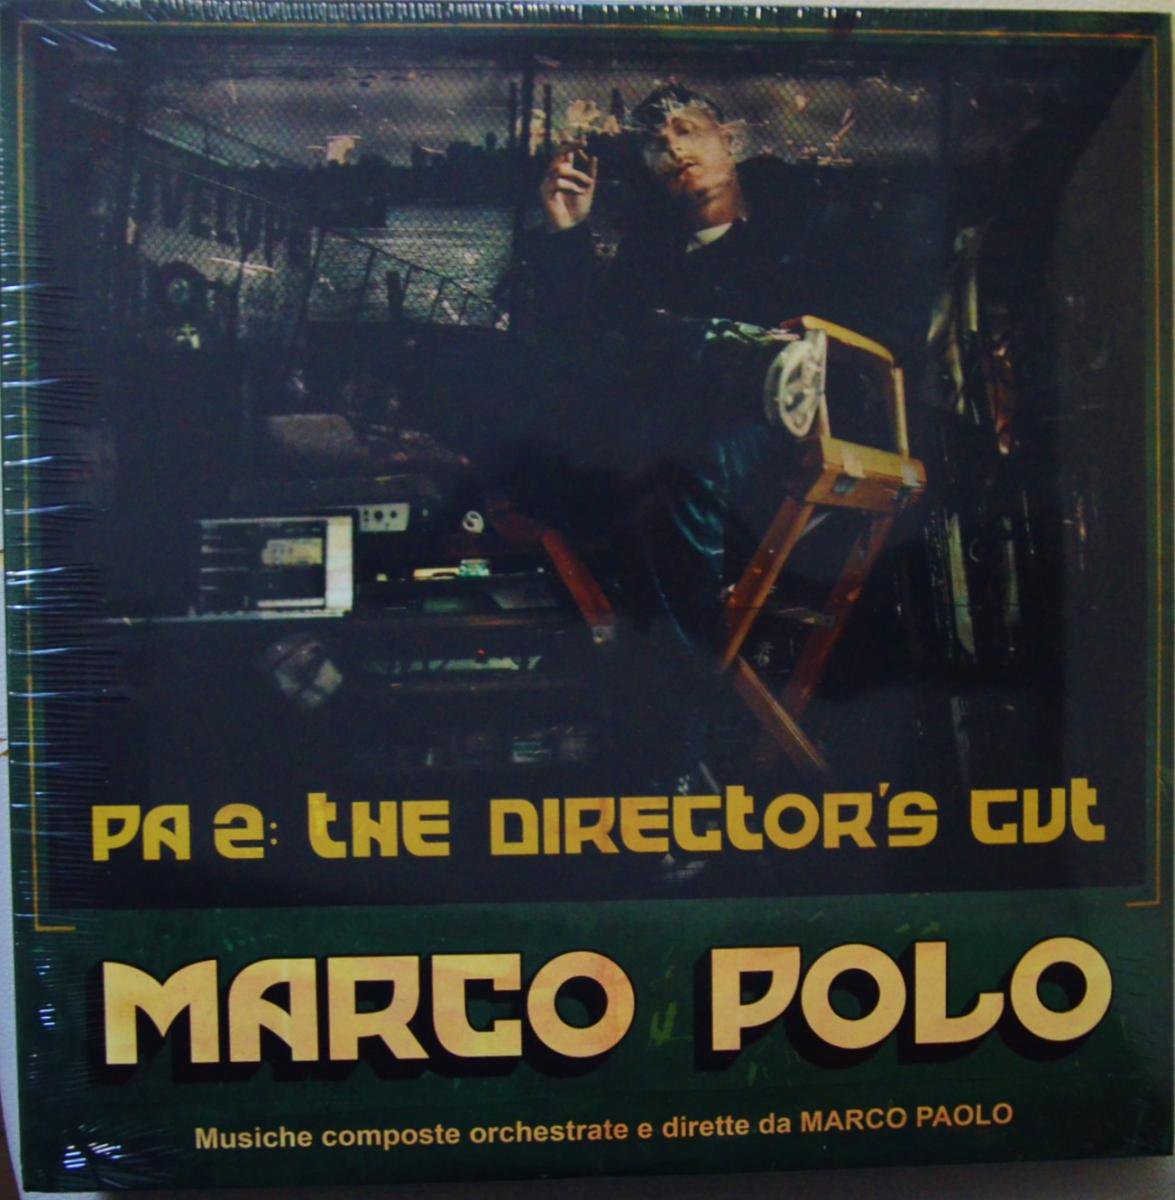 MARCO POLO / PA 2: THE DIRECTOR'S CUT (3LP)